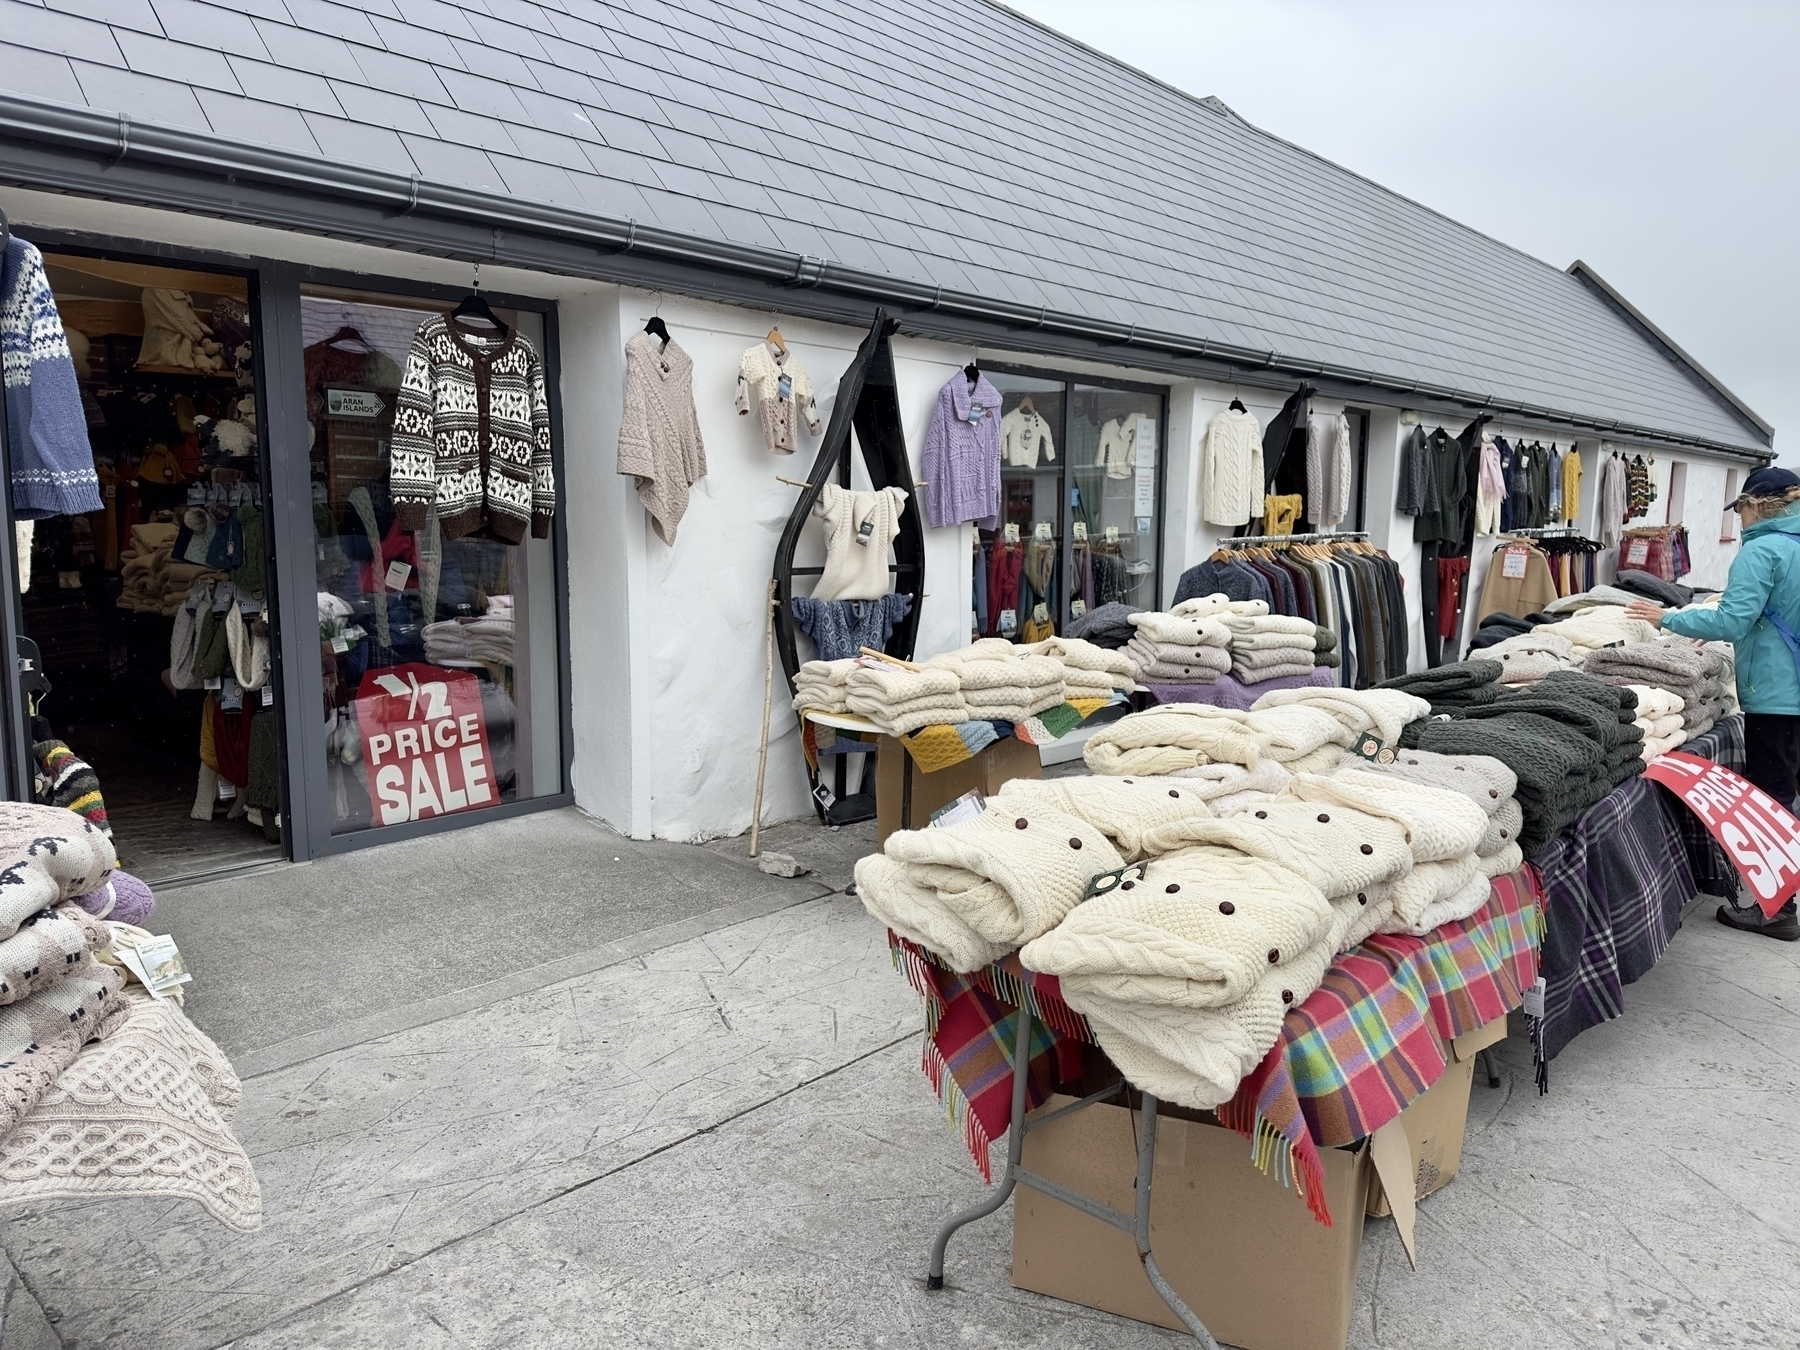 Auto-generated description: A market stall is displaying various sweaters and garments on tables, with additional clothing hanging on the walls and racks inside a building, and a Price Sale sign visible.